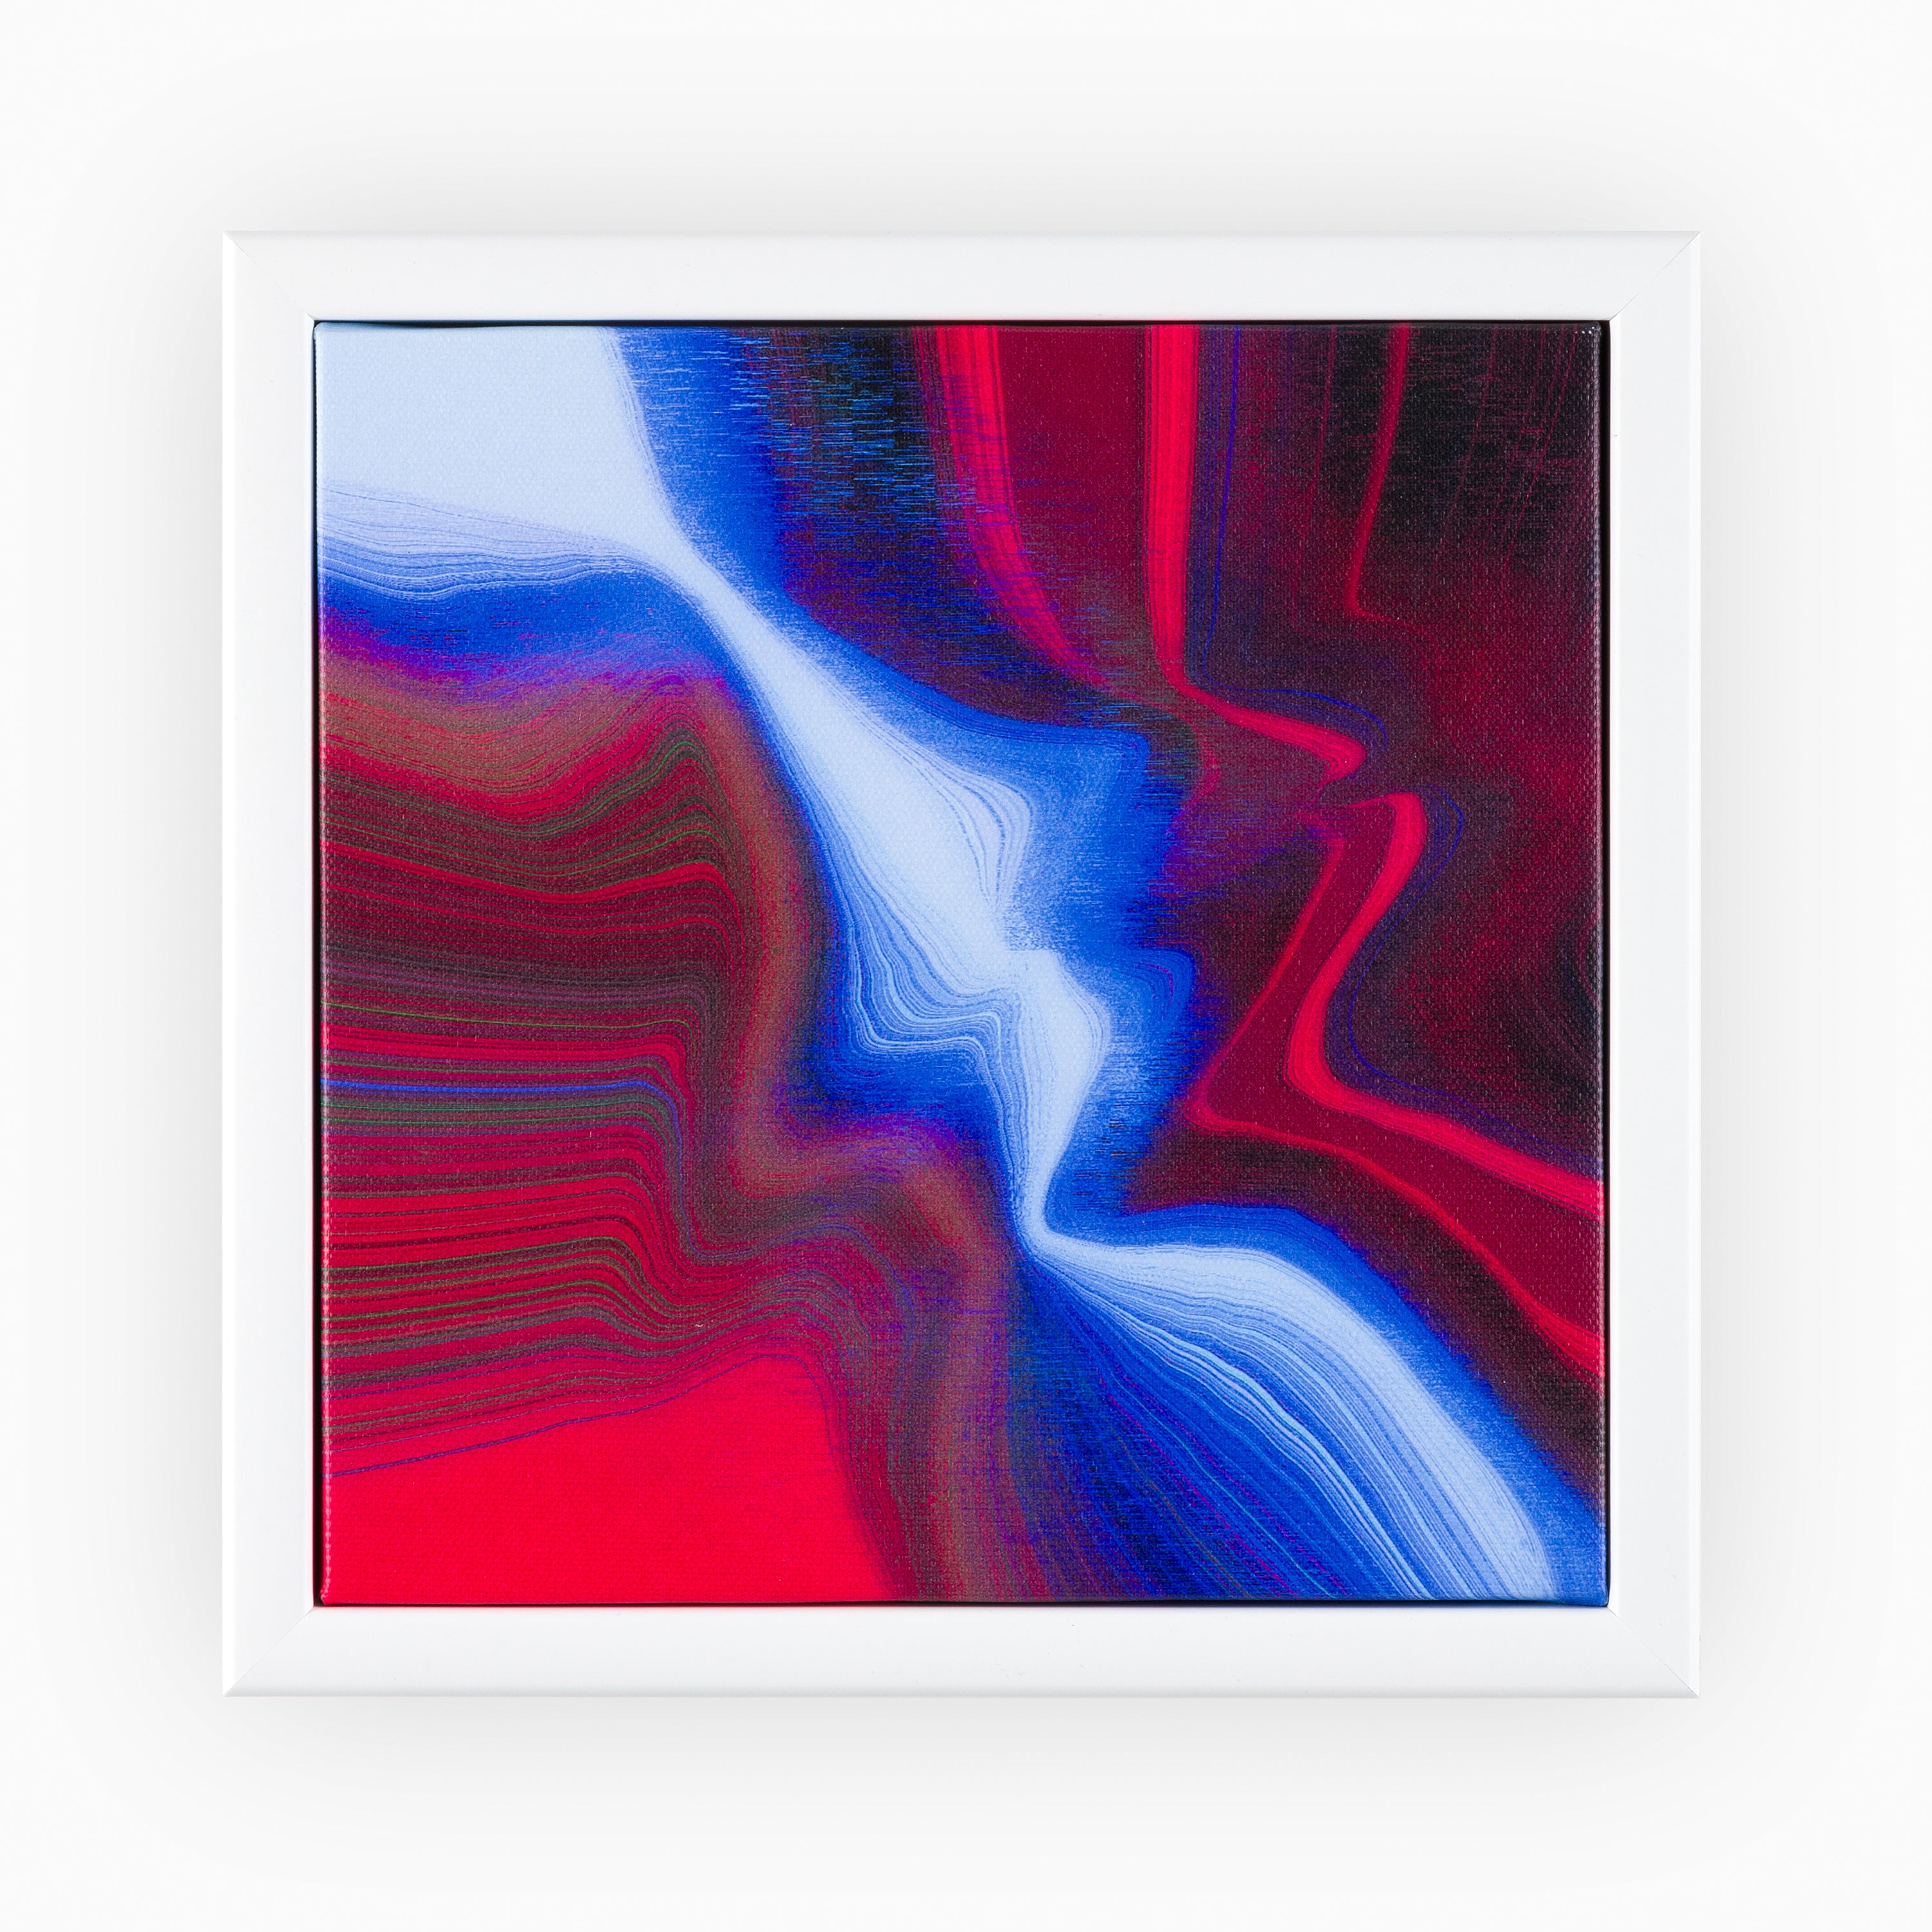 Striking abstract canvas artwork with undulating shades of crimson and sapphire, evoking the ebbs and flows of an ocean, showcased in a sleek white frame.